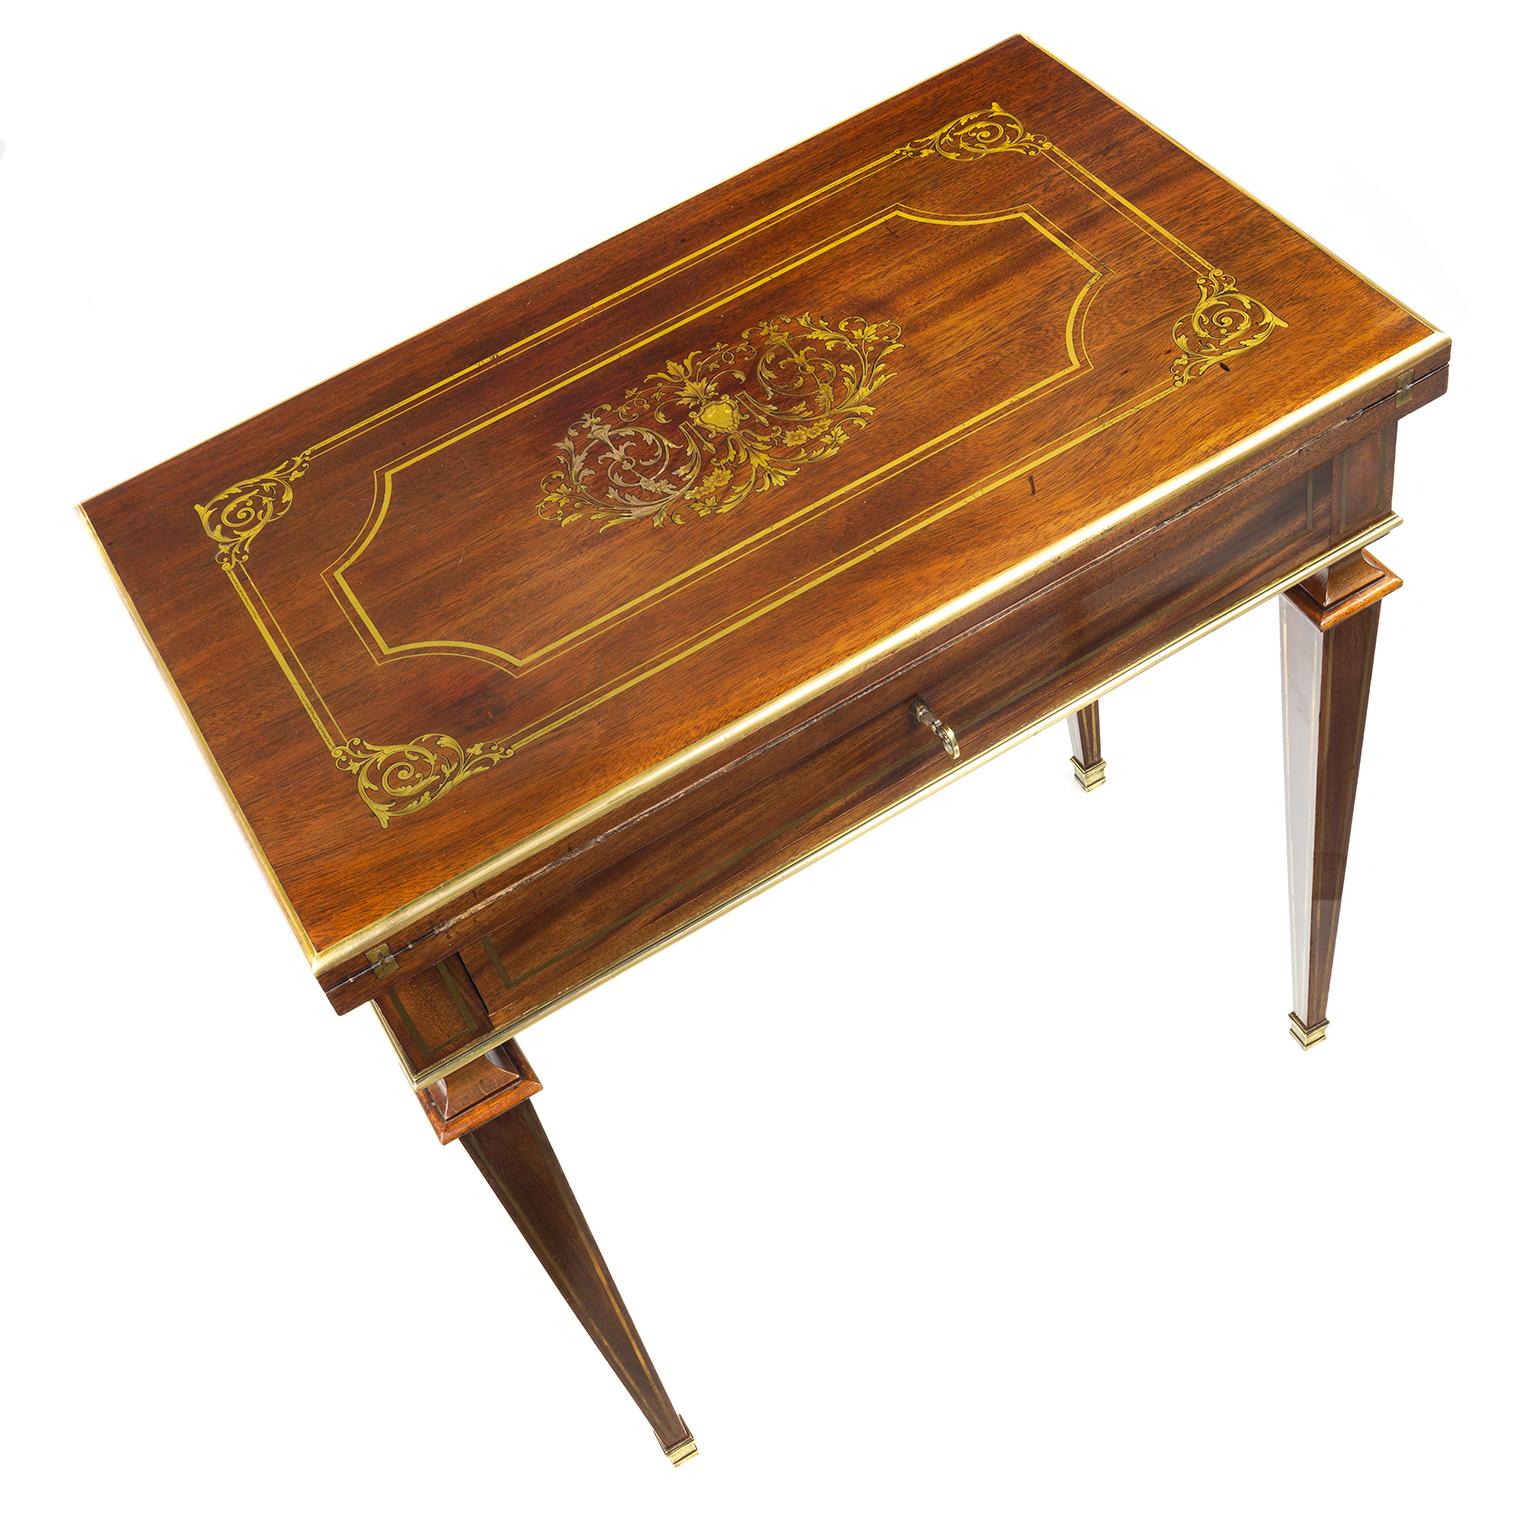 A French Empire combination writing, card table and dressing table. Mahogany with finely inlaid cut brass and a vacant cartouche within an ornate scroll frame, line inlaid borders. The purple felt interior within gilt tooled leather borders, the